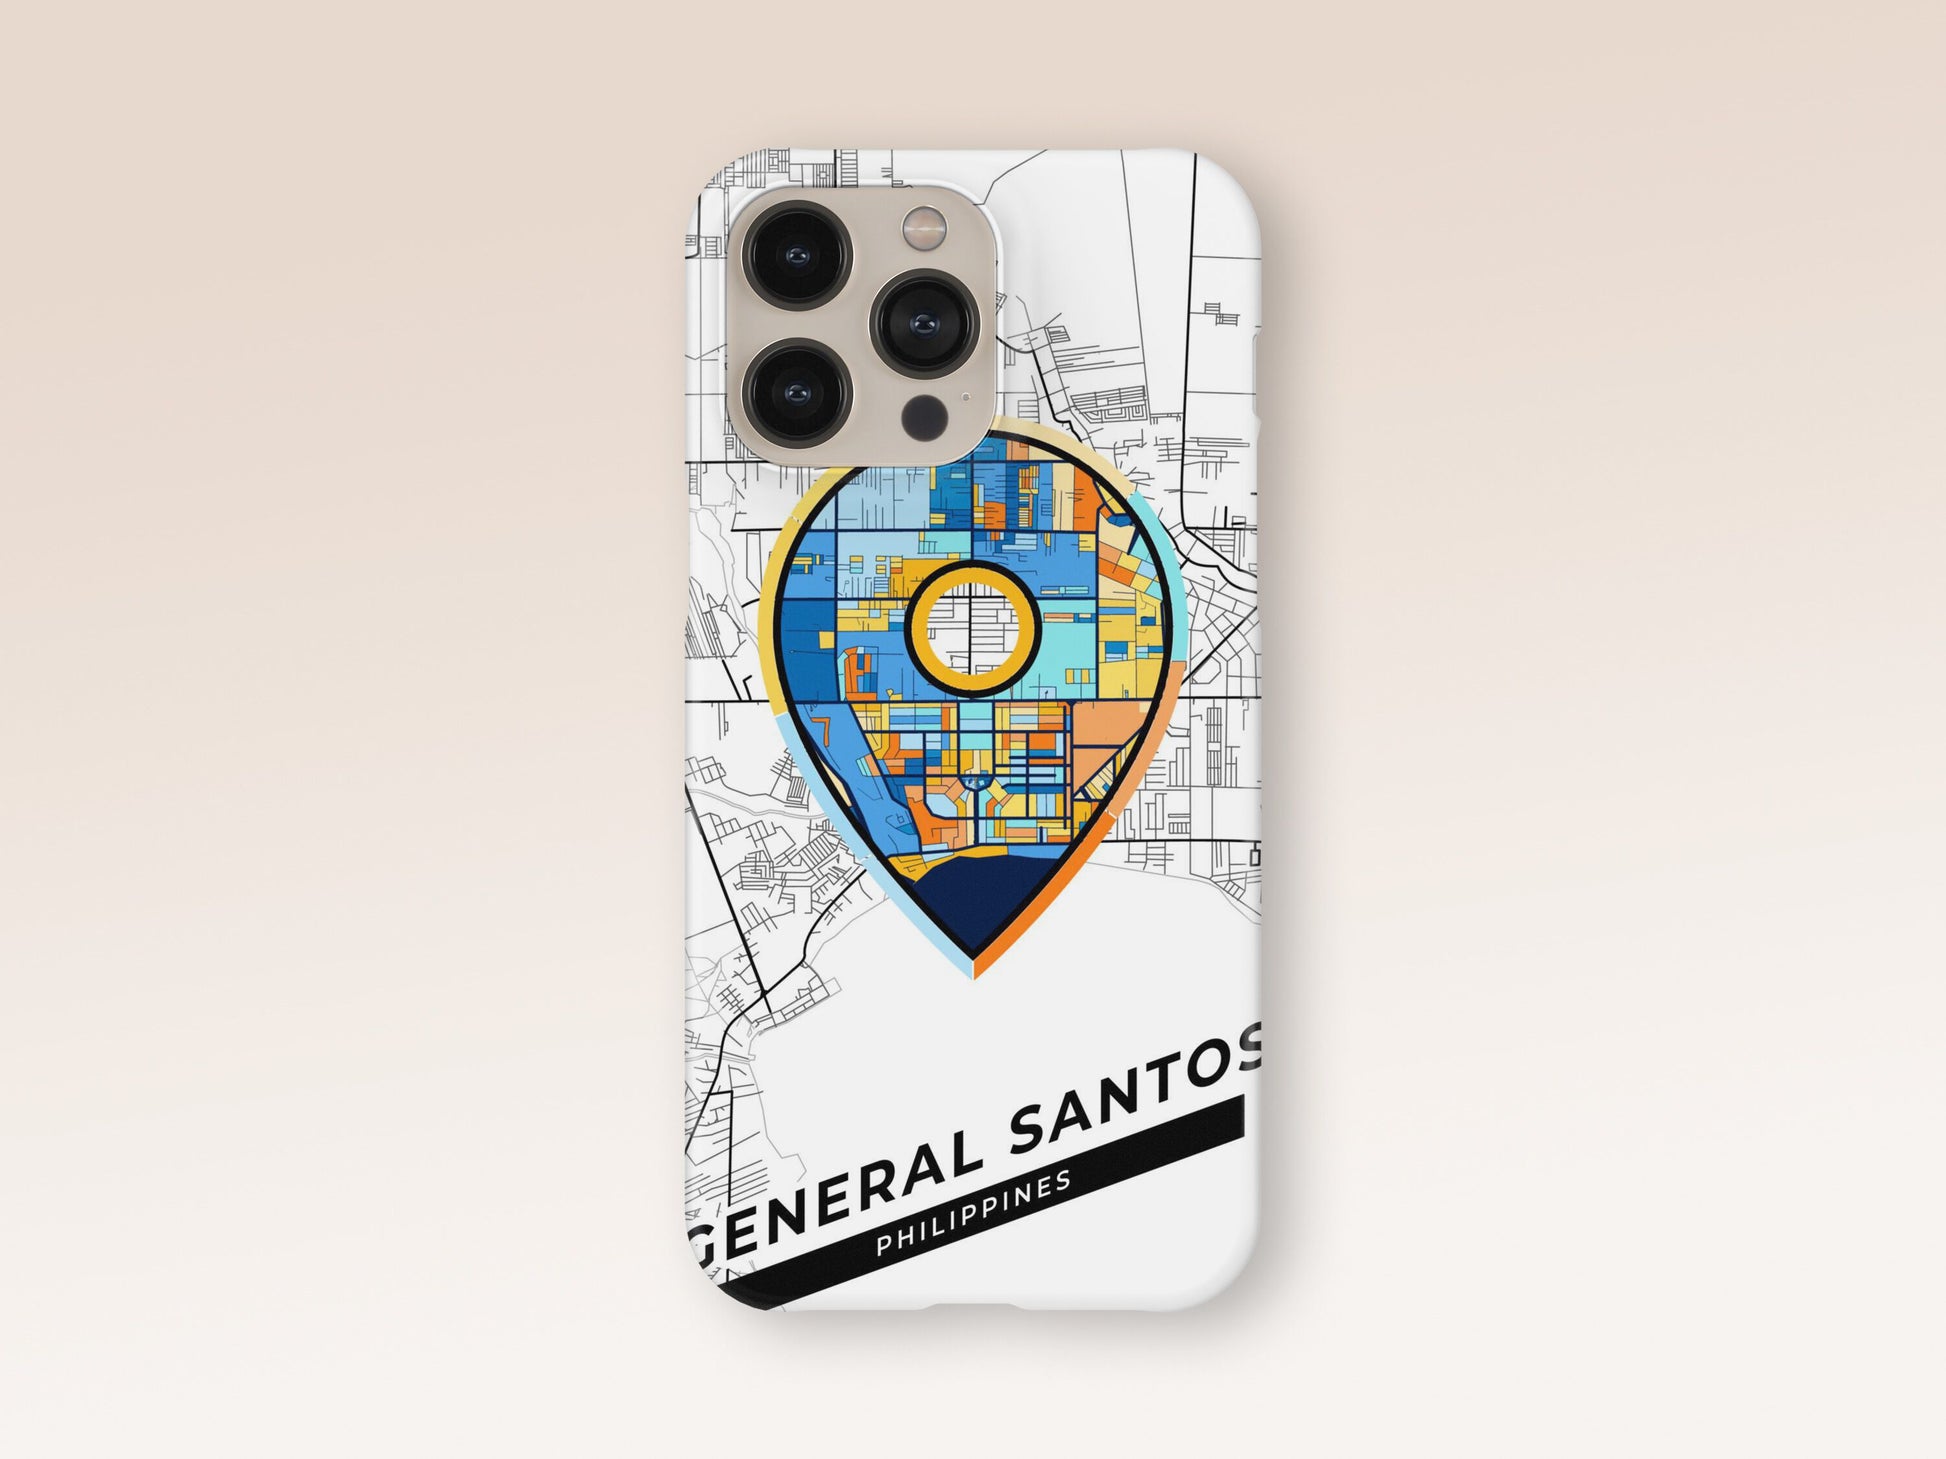 General Santos Philippines slim phone case with colorful icon. Birthday, wedding or housewarming gift. Couple match cases. 1